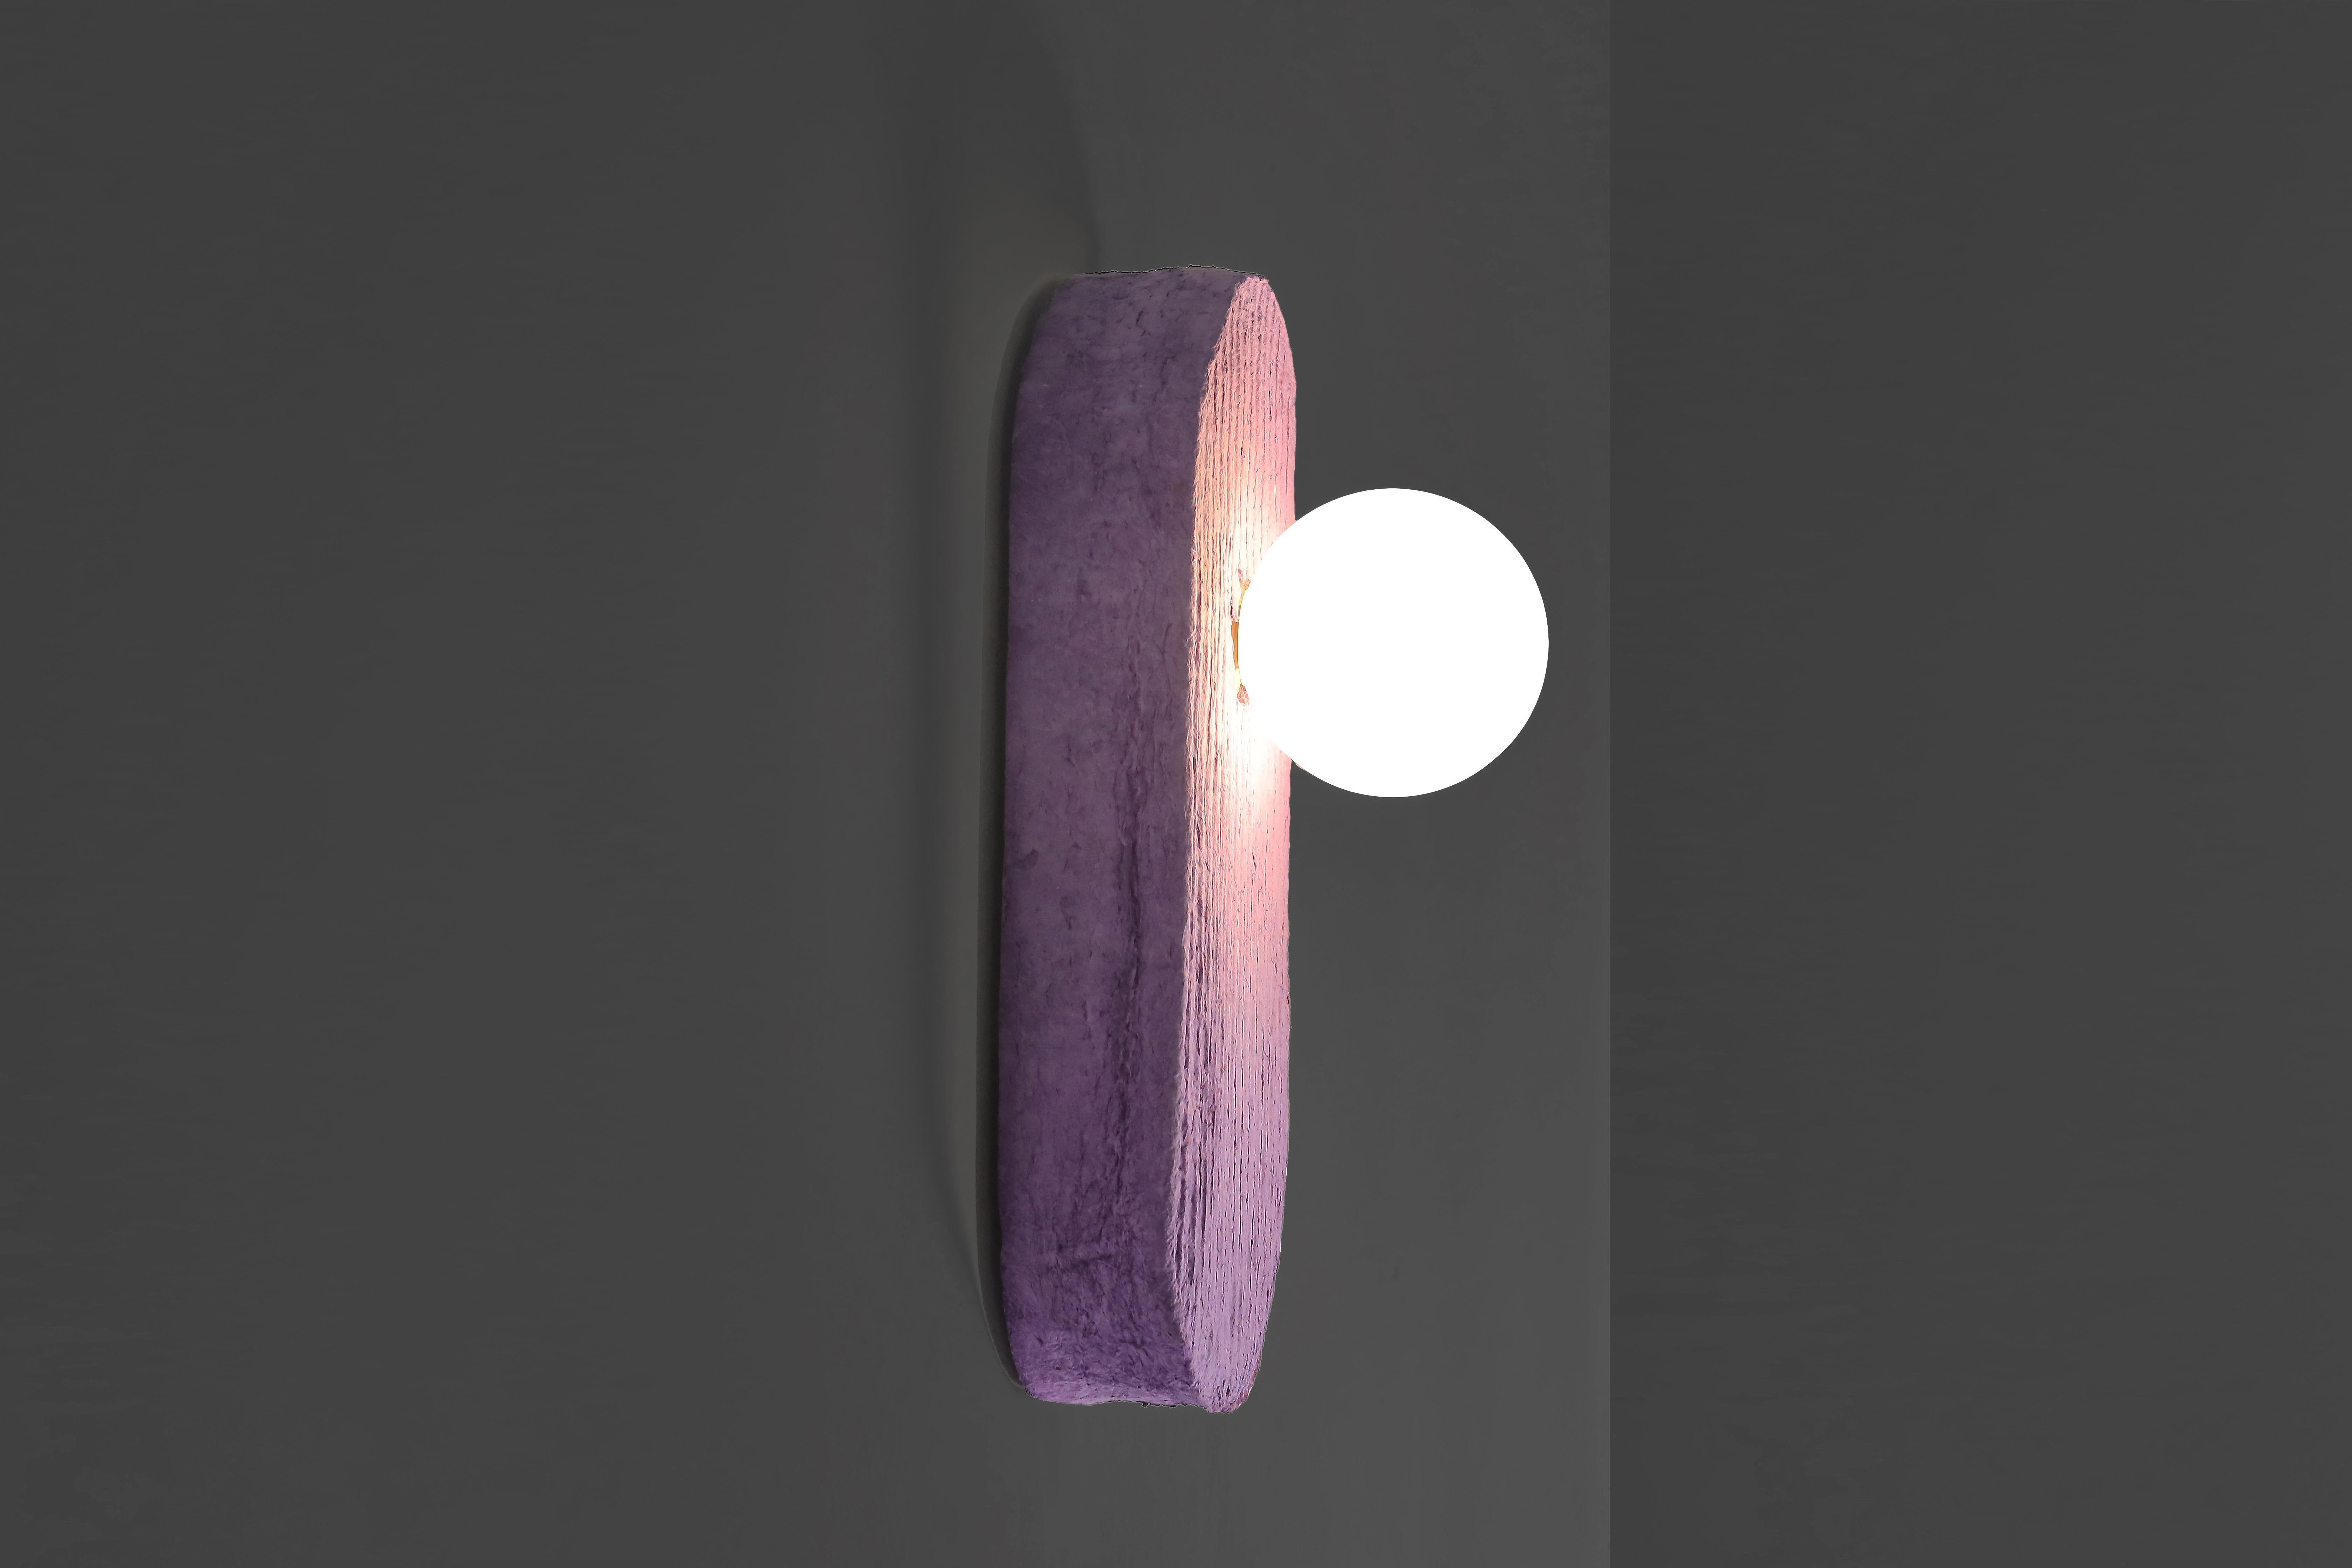 Italian set of 5 wall sconce lamp purple Pillo, paper & glass made in Italy by A.Epifani For Sale